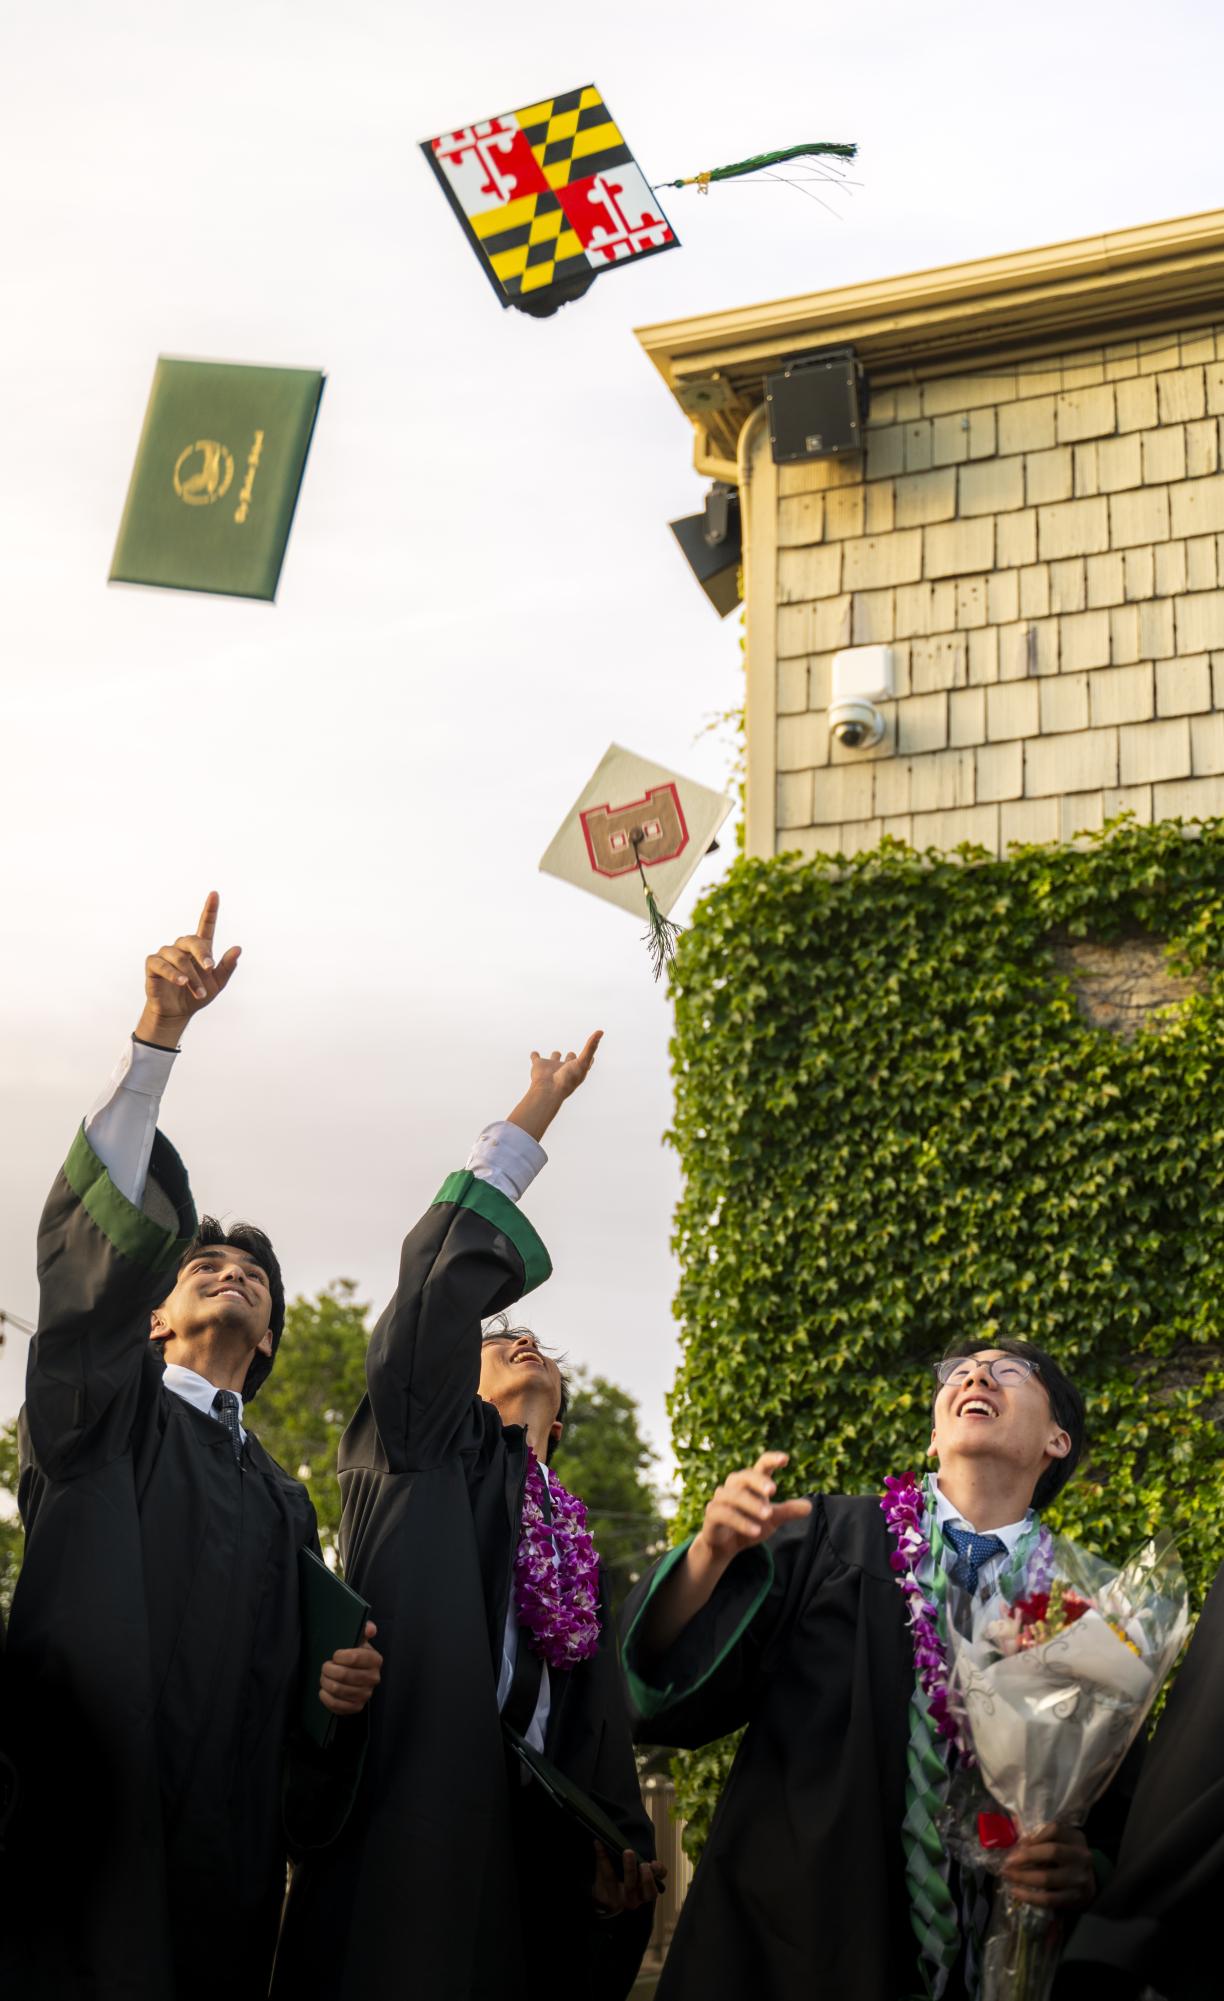 Seniors Reza Jalil, Max Xing and Adrian Liu toss their caps. “You are both the tree and your own orchard, and part of a larger orchard,” Yager said. “The beauty of a tree and an orchard is that they get to start over each year.